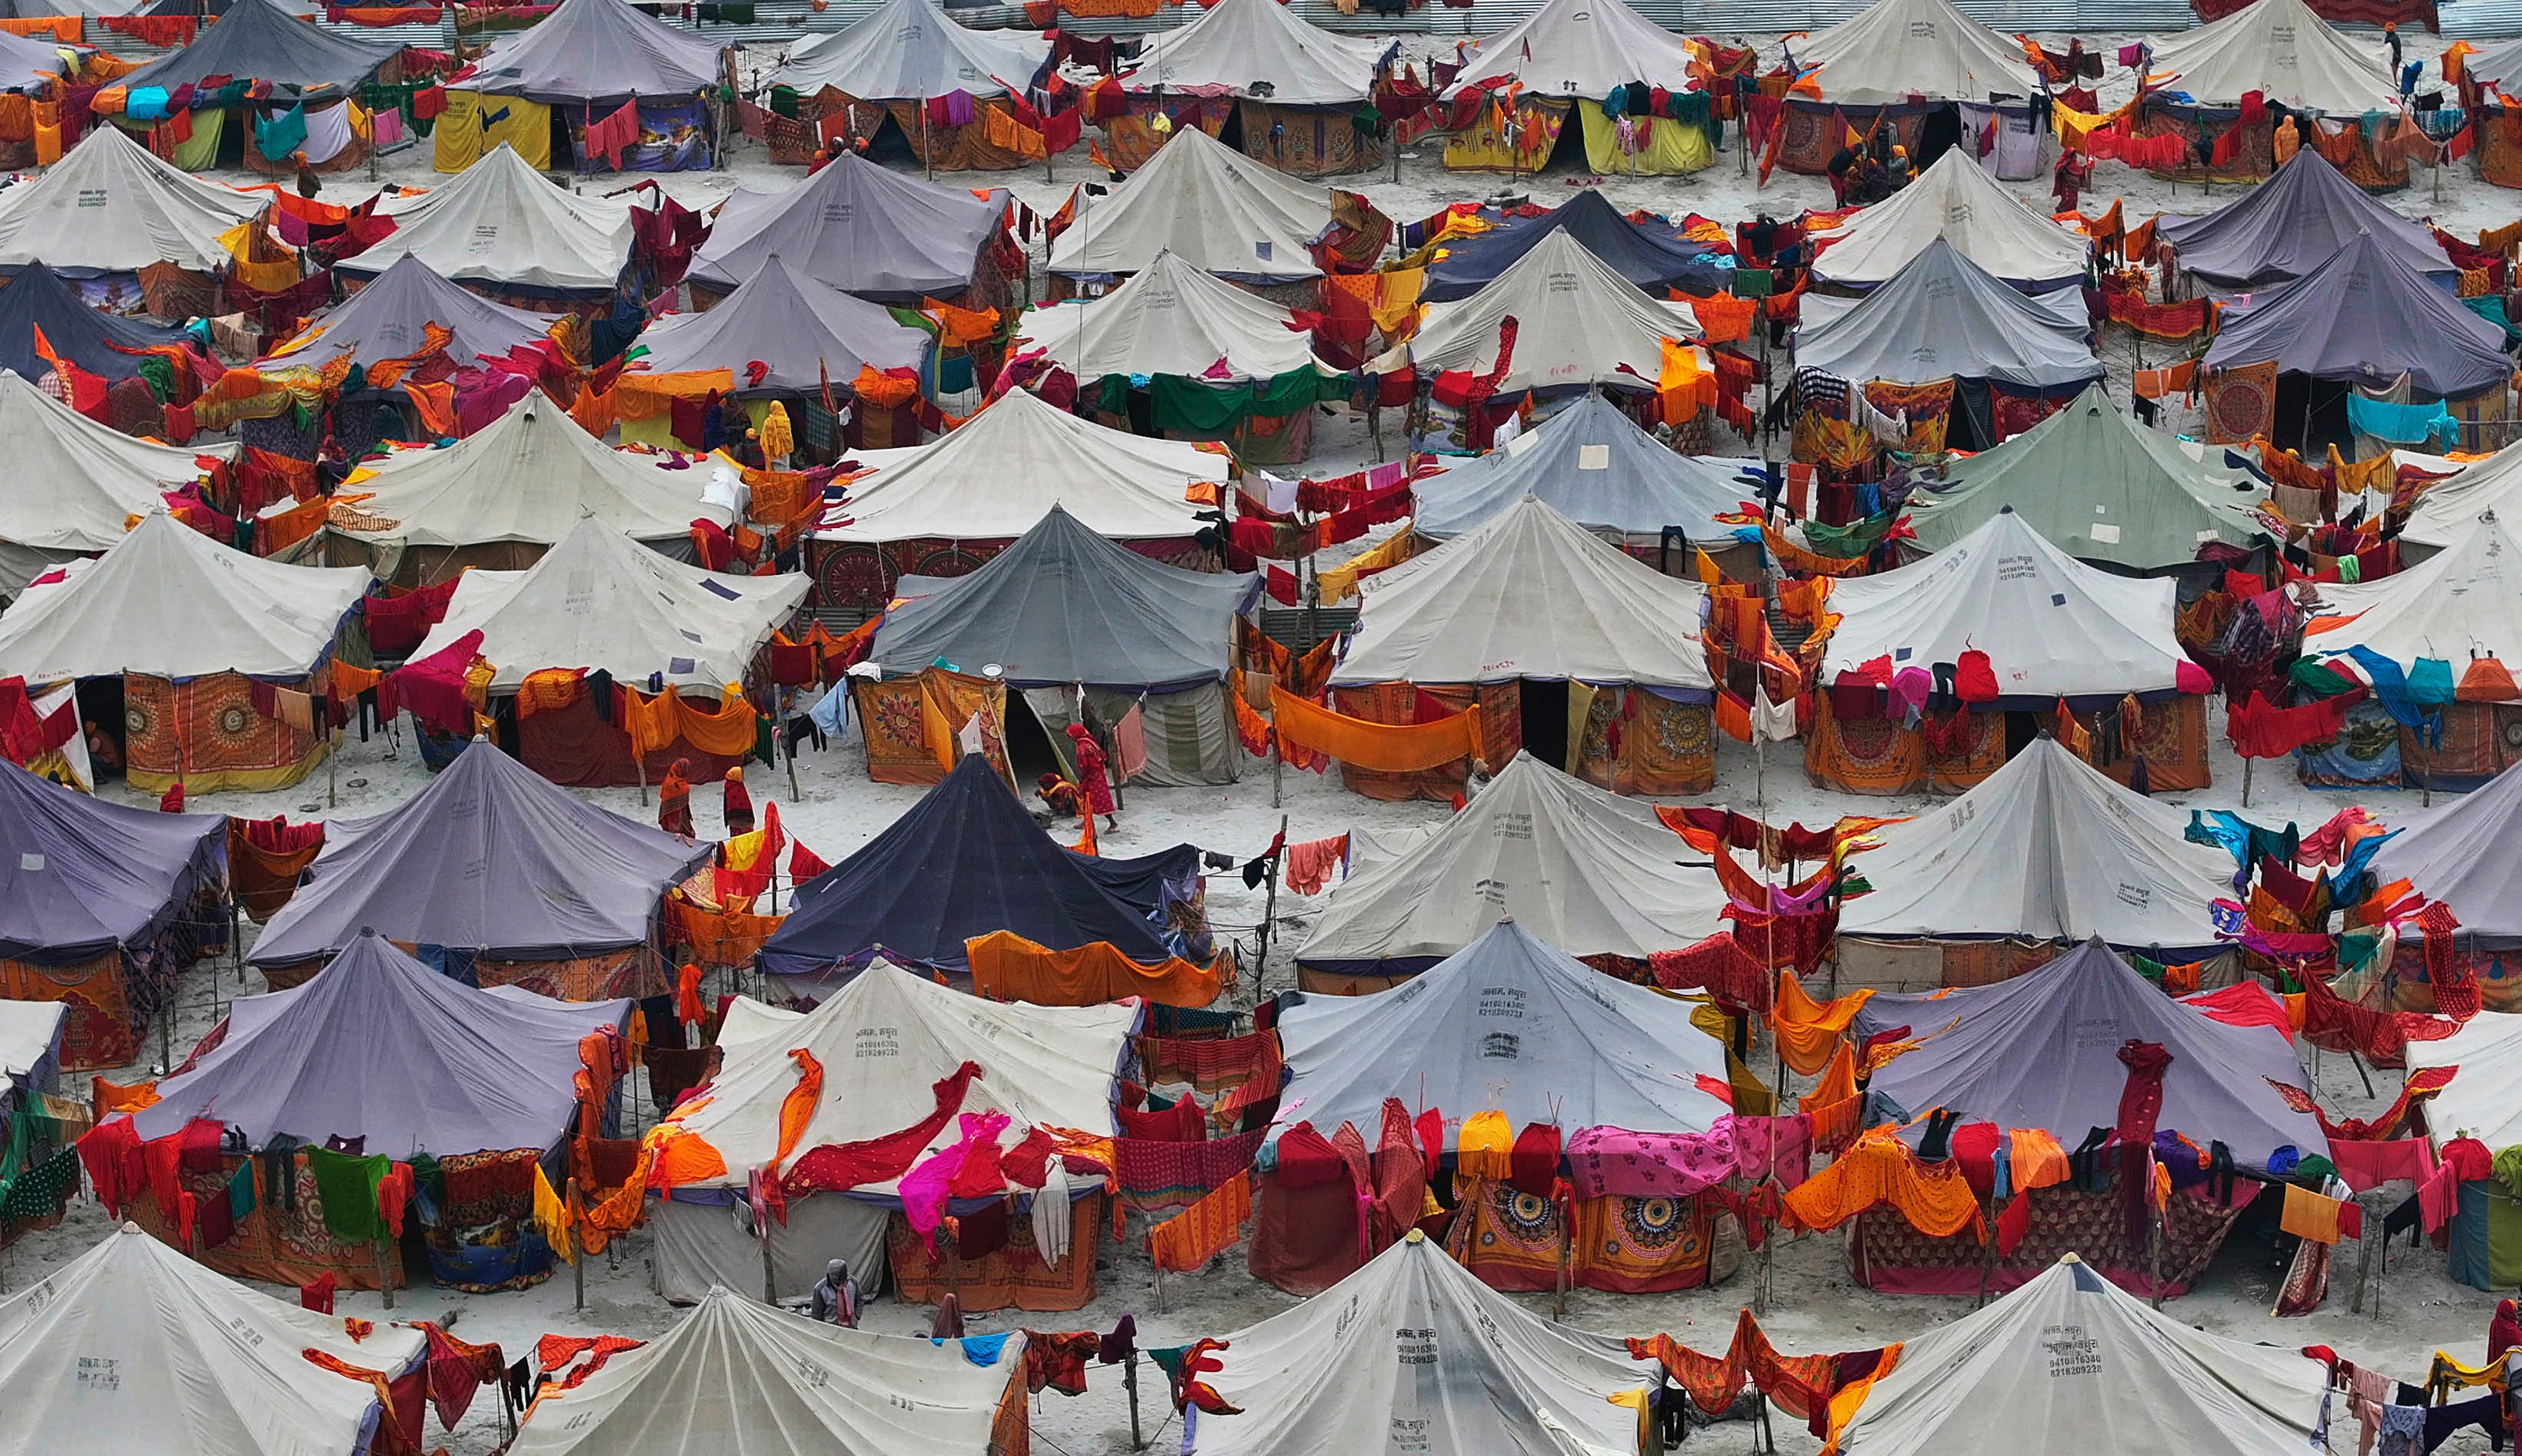 Hindu devotees stay in tents at a camp for people arriving to attend the temple's opening in Ayodhya, India, on Friday. 